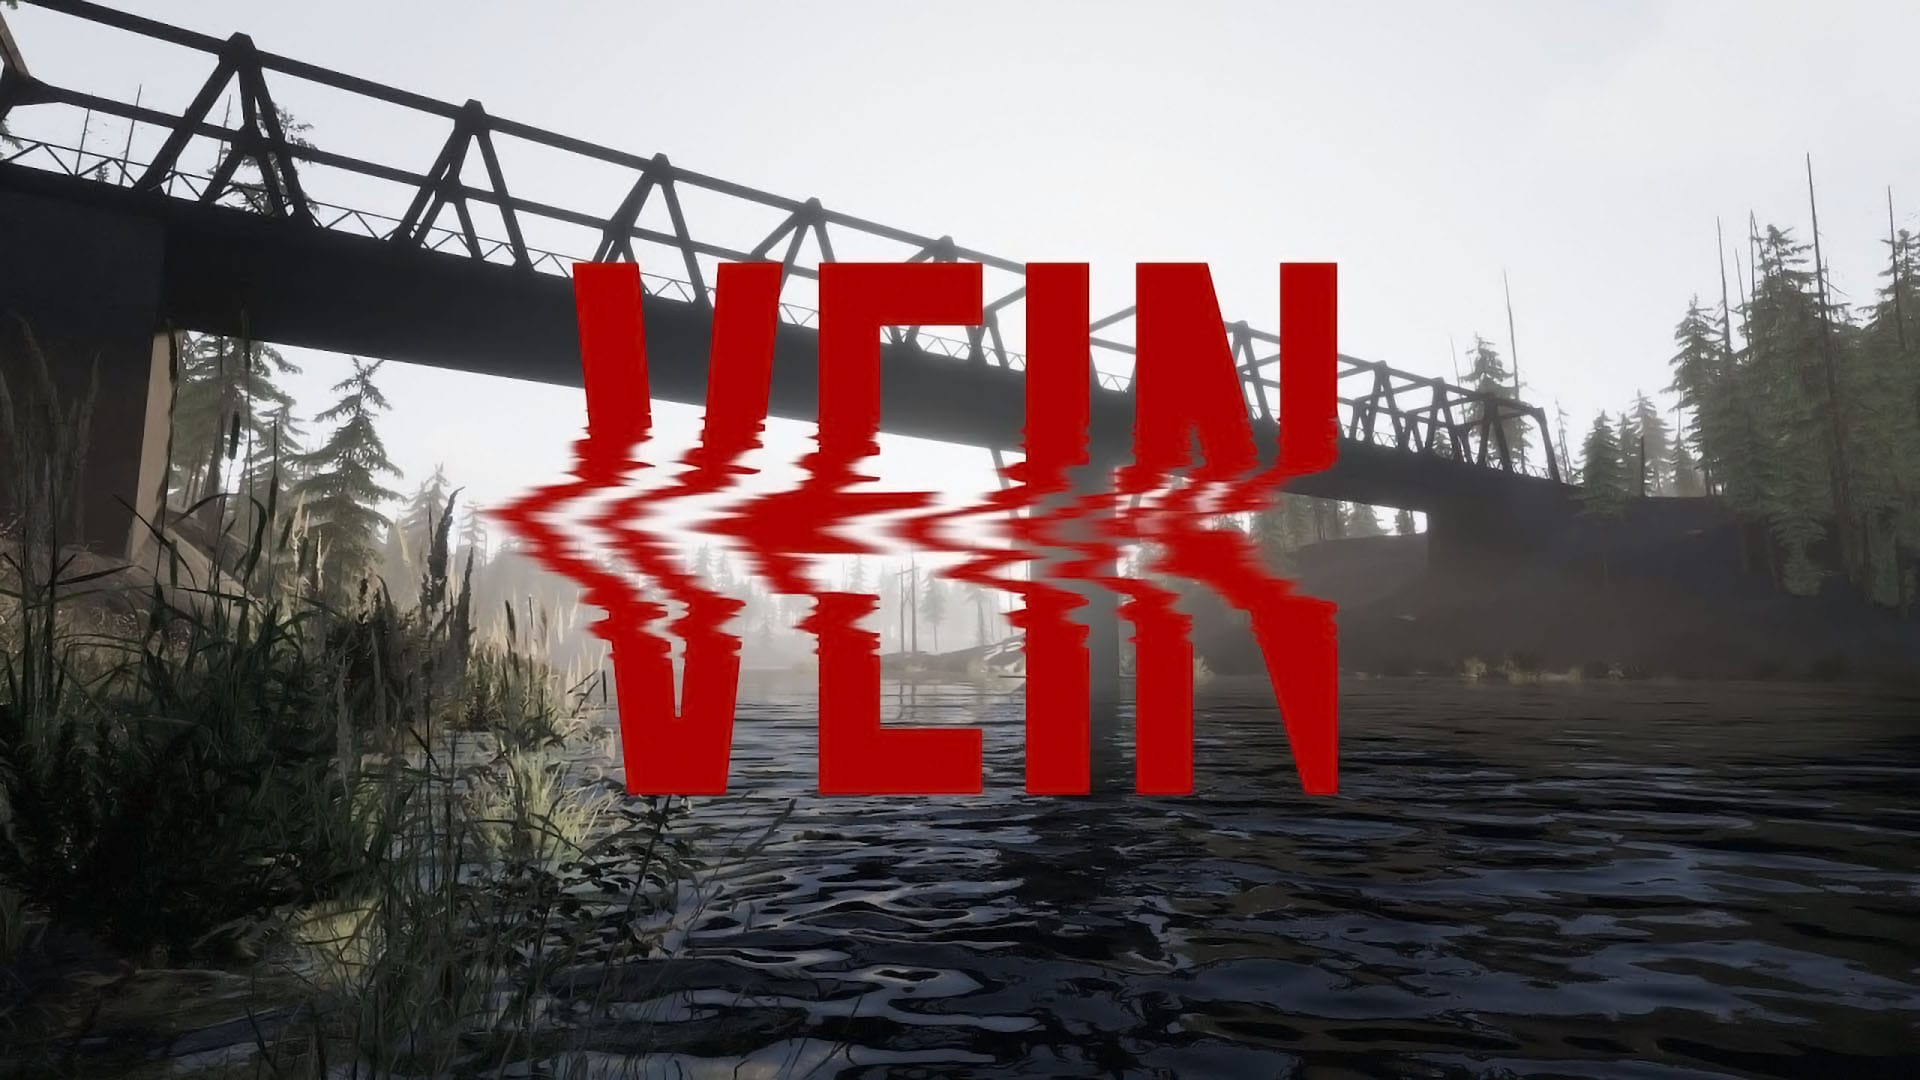 Zombie Survival Game Vein Reveals Upcoming Content & Updates in New Video